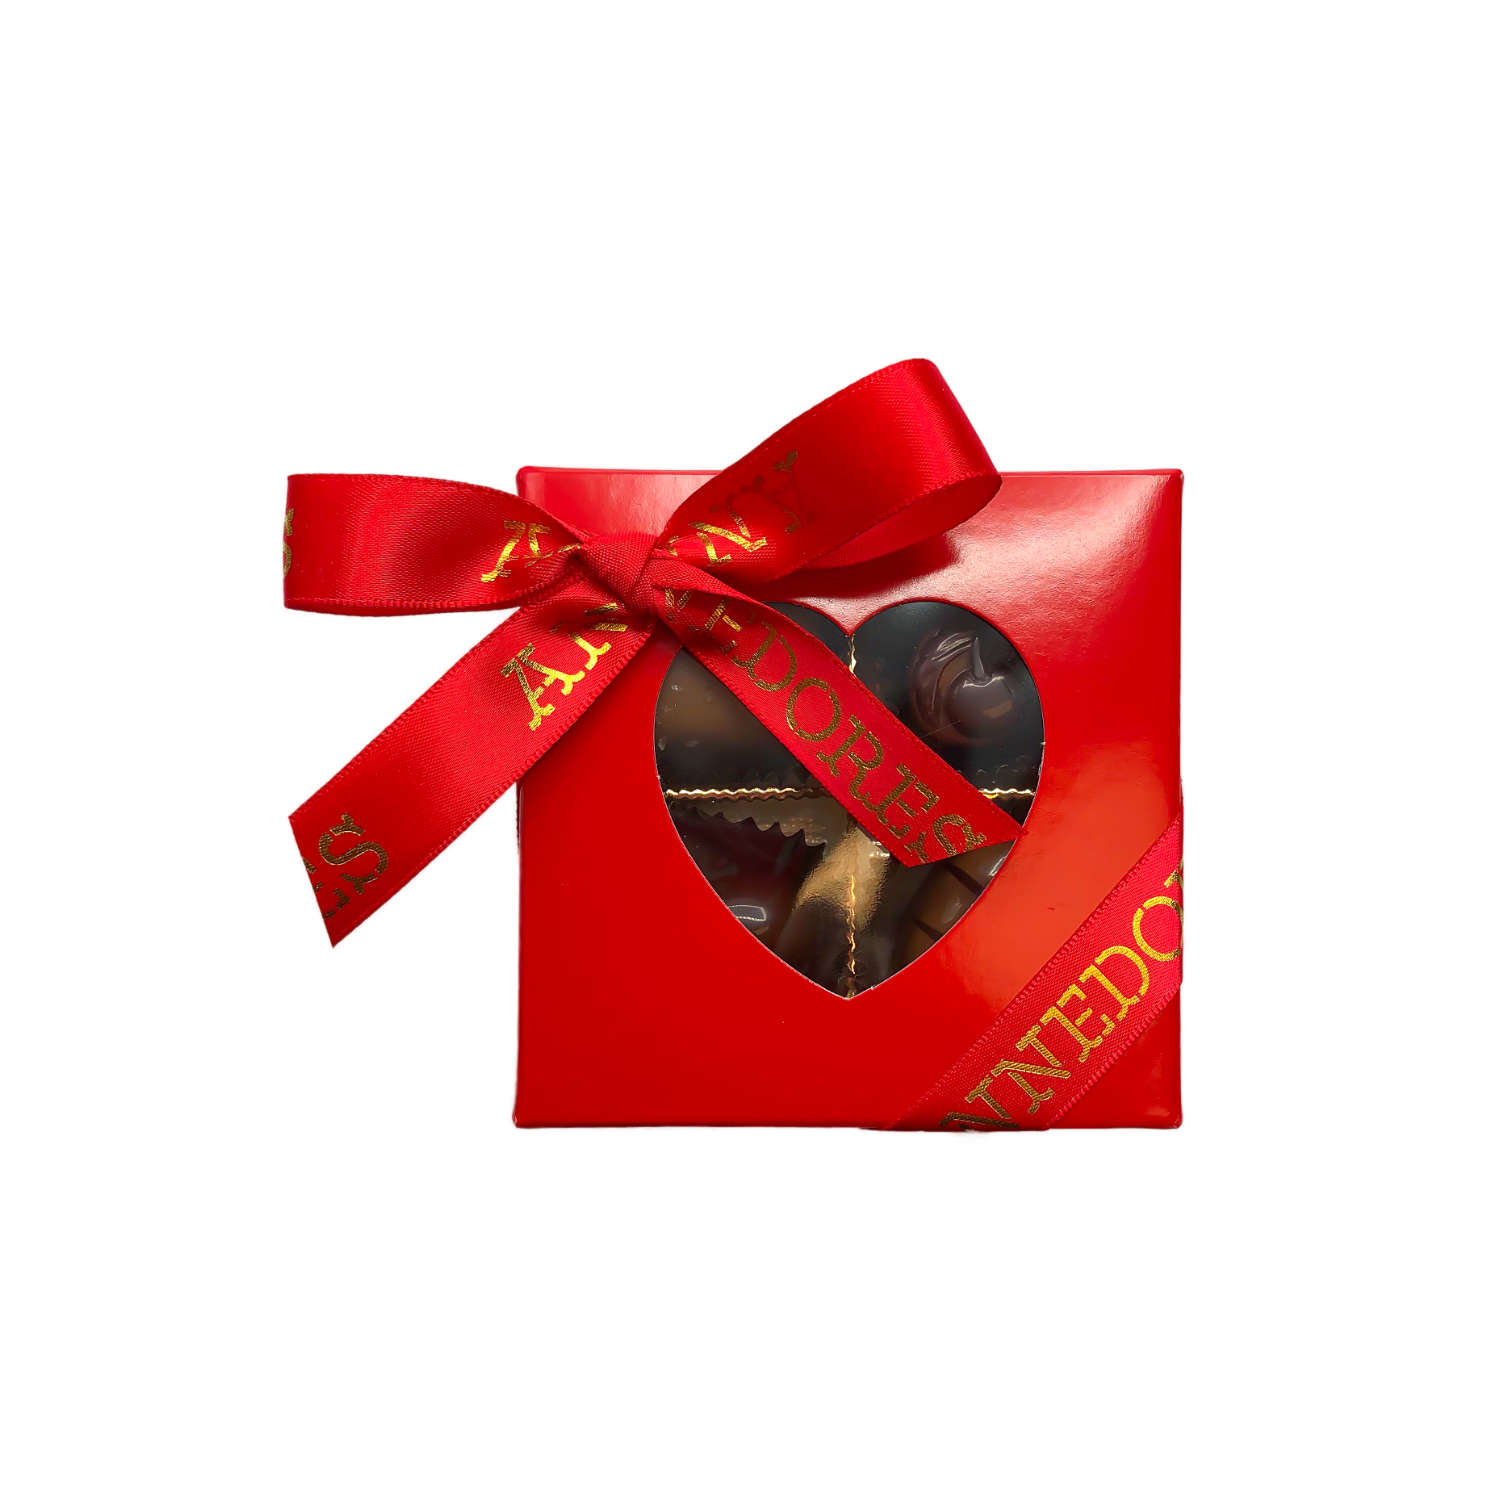 Annedores Truffles 4-piece-gift-box